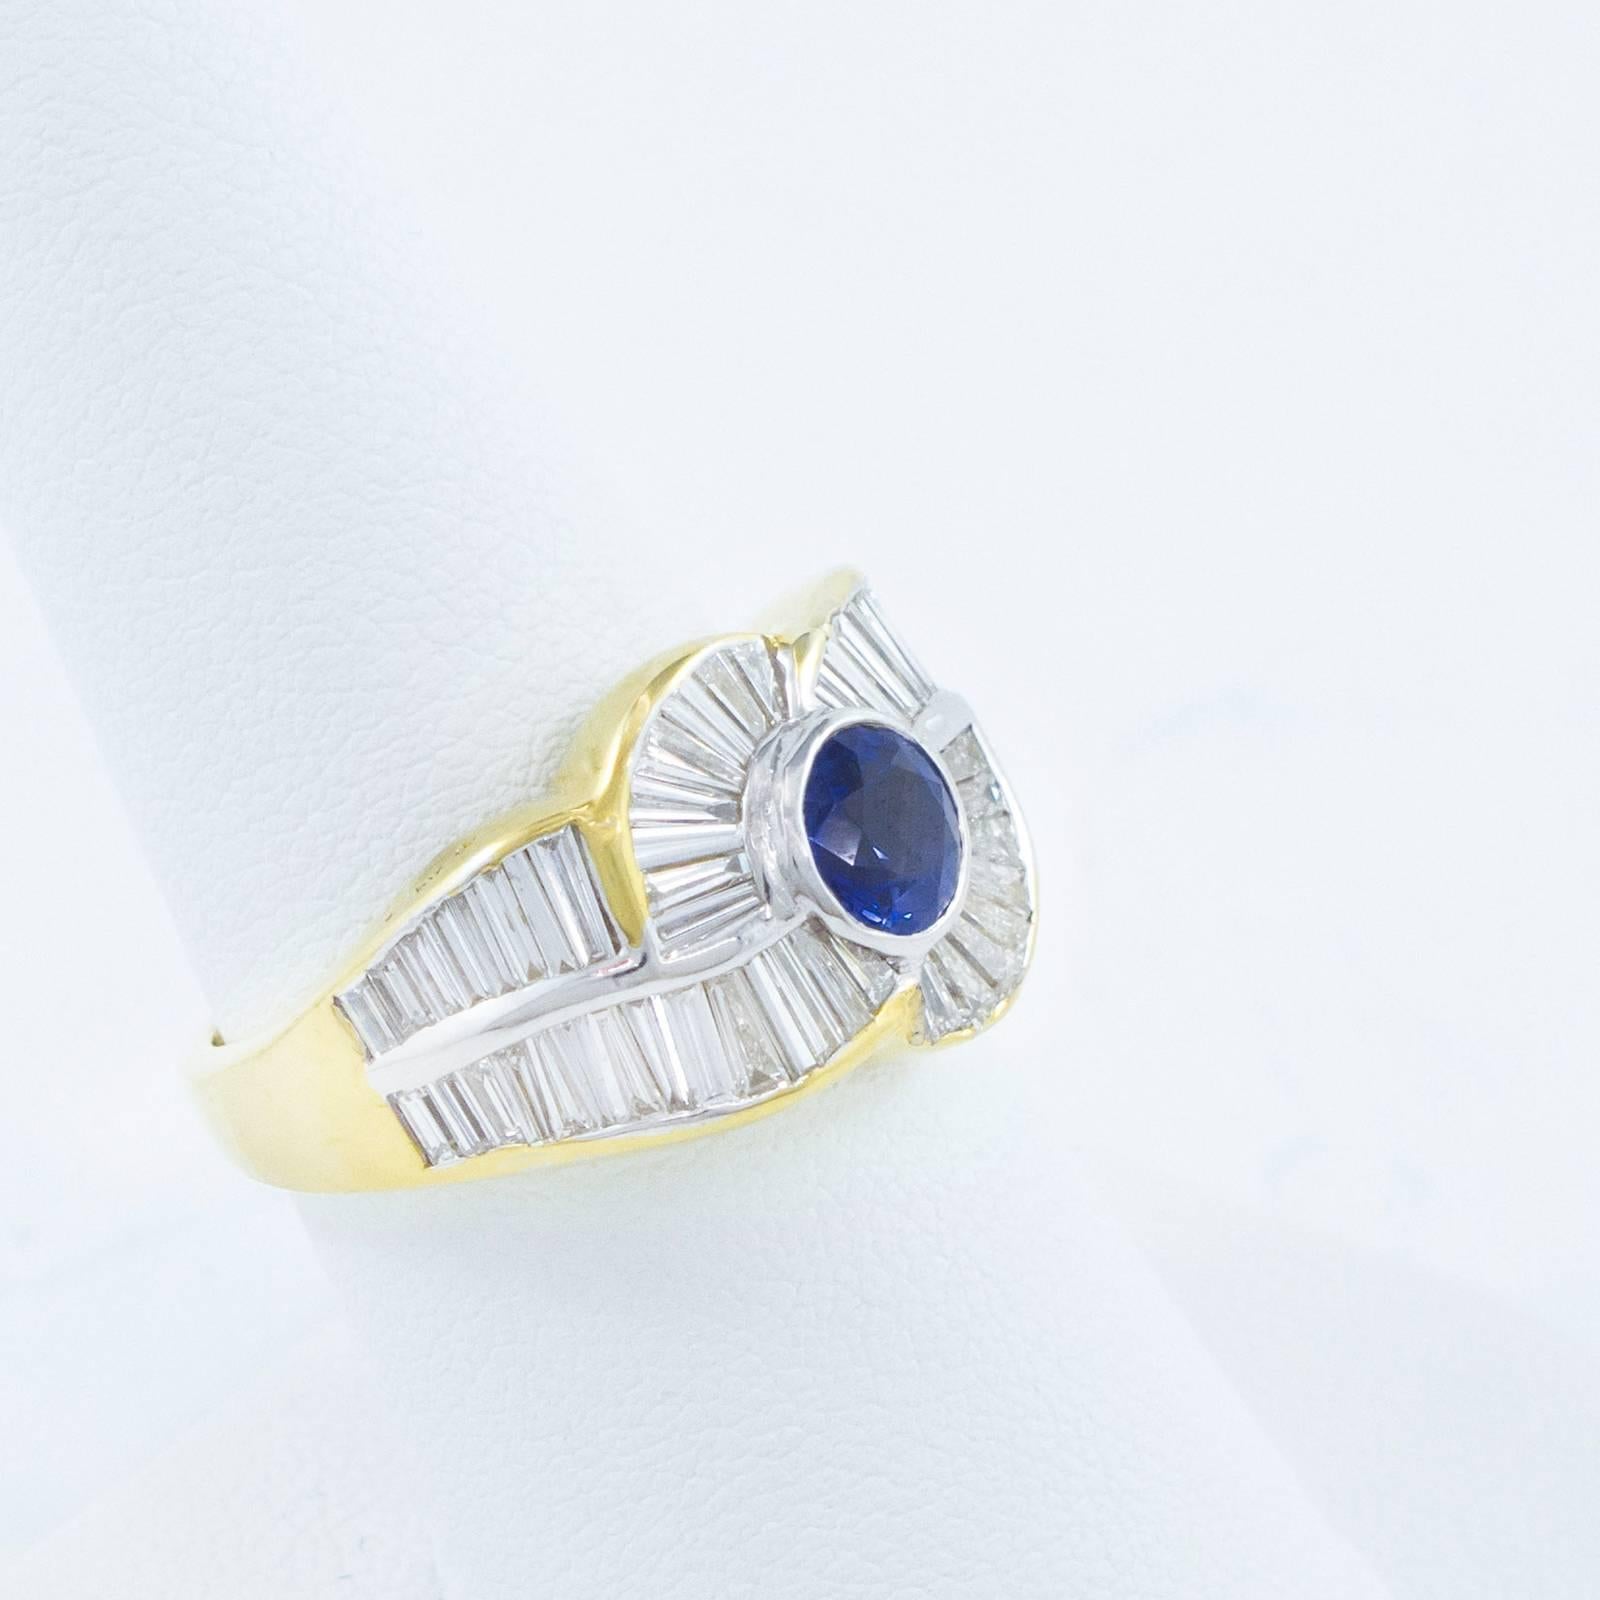 A stunning 7.92 Carat Diamond and Sapphire ring is comprised of sixty-one VVS, invisibly channel set Baguette Cut Diamonds surrounding one beautiful collet set round, Mixed Cut Blue Sapphire in this contemporary, custom crafted 18 Karat yellow and